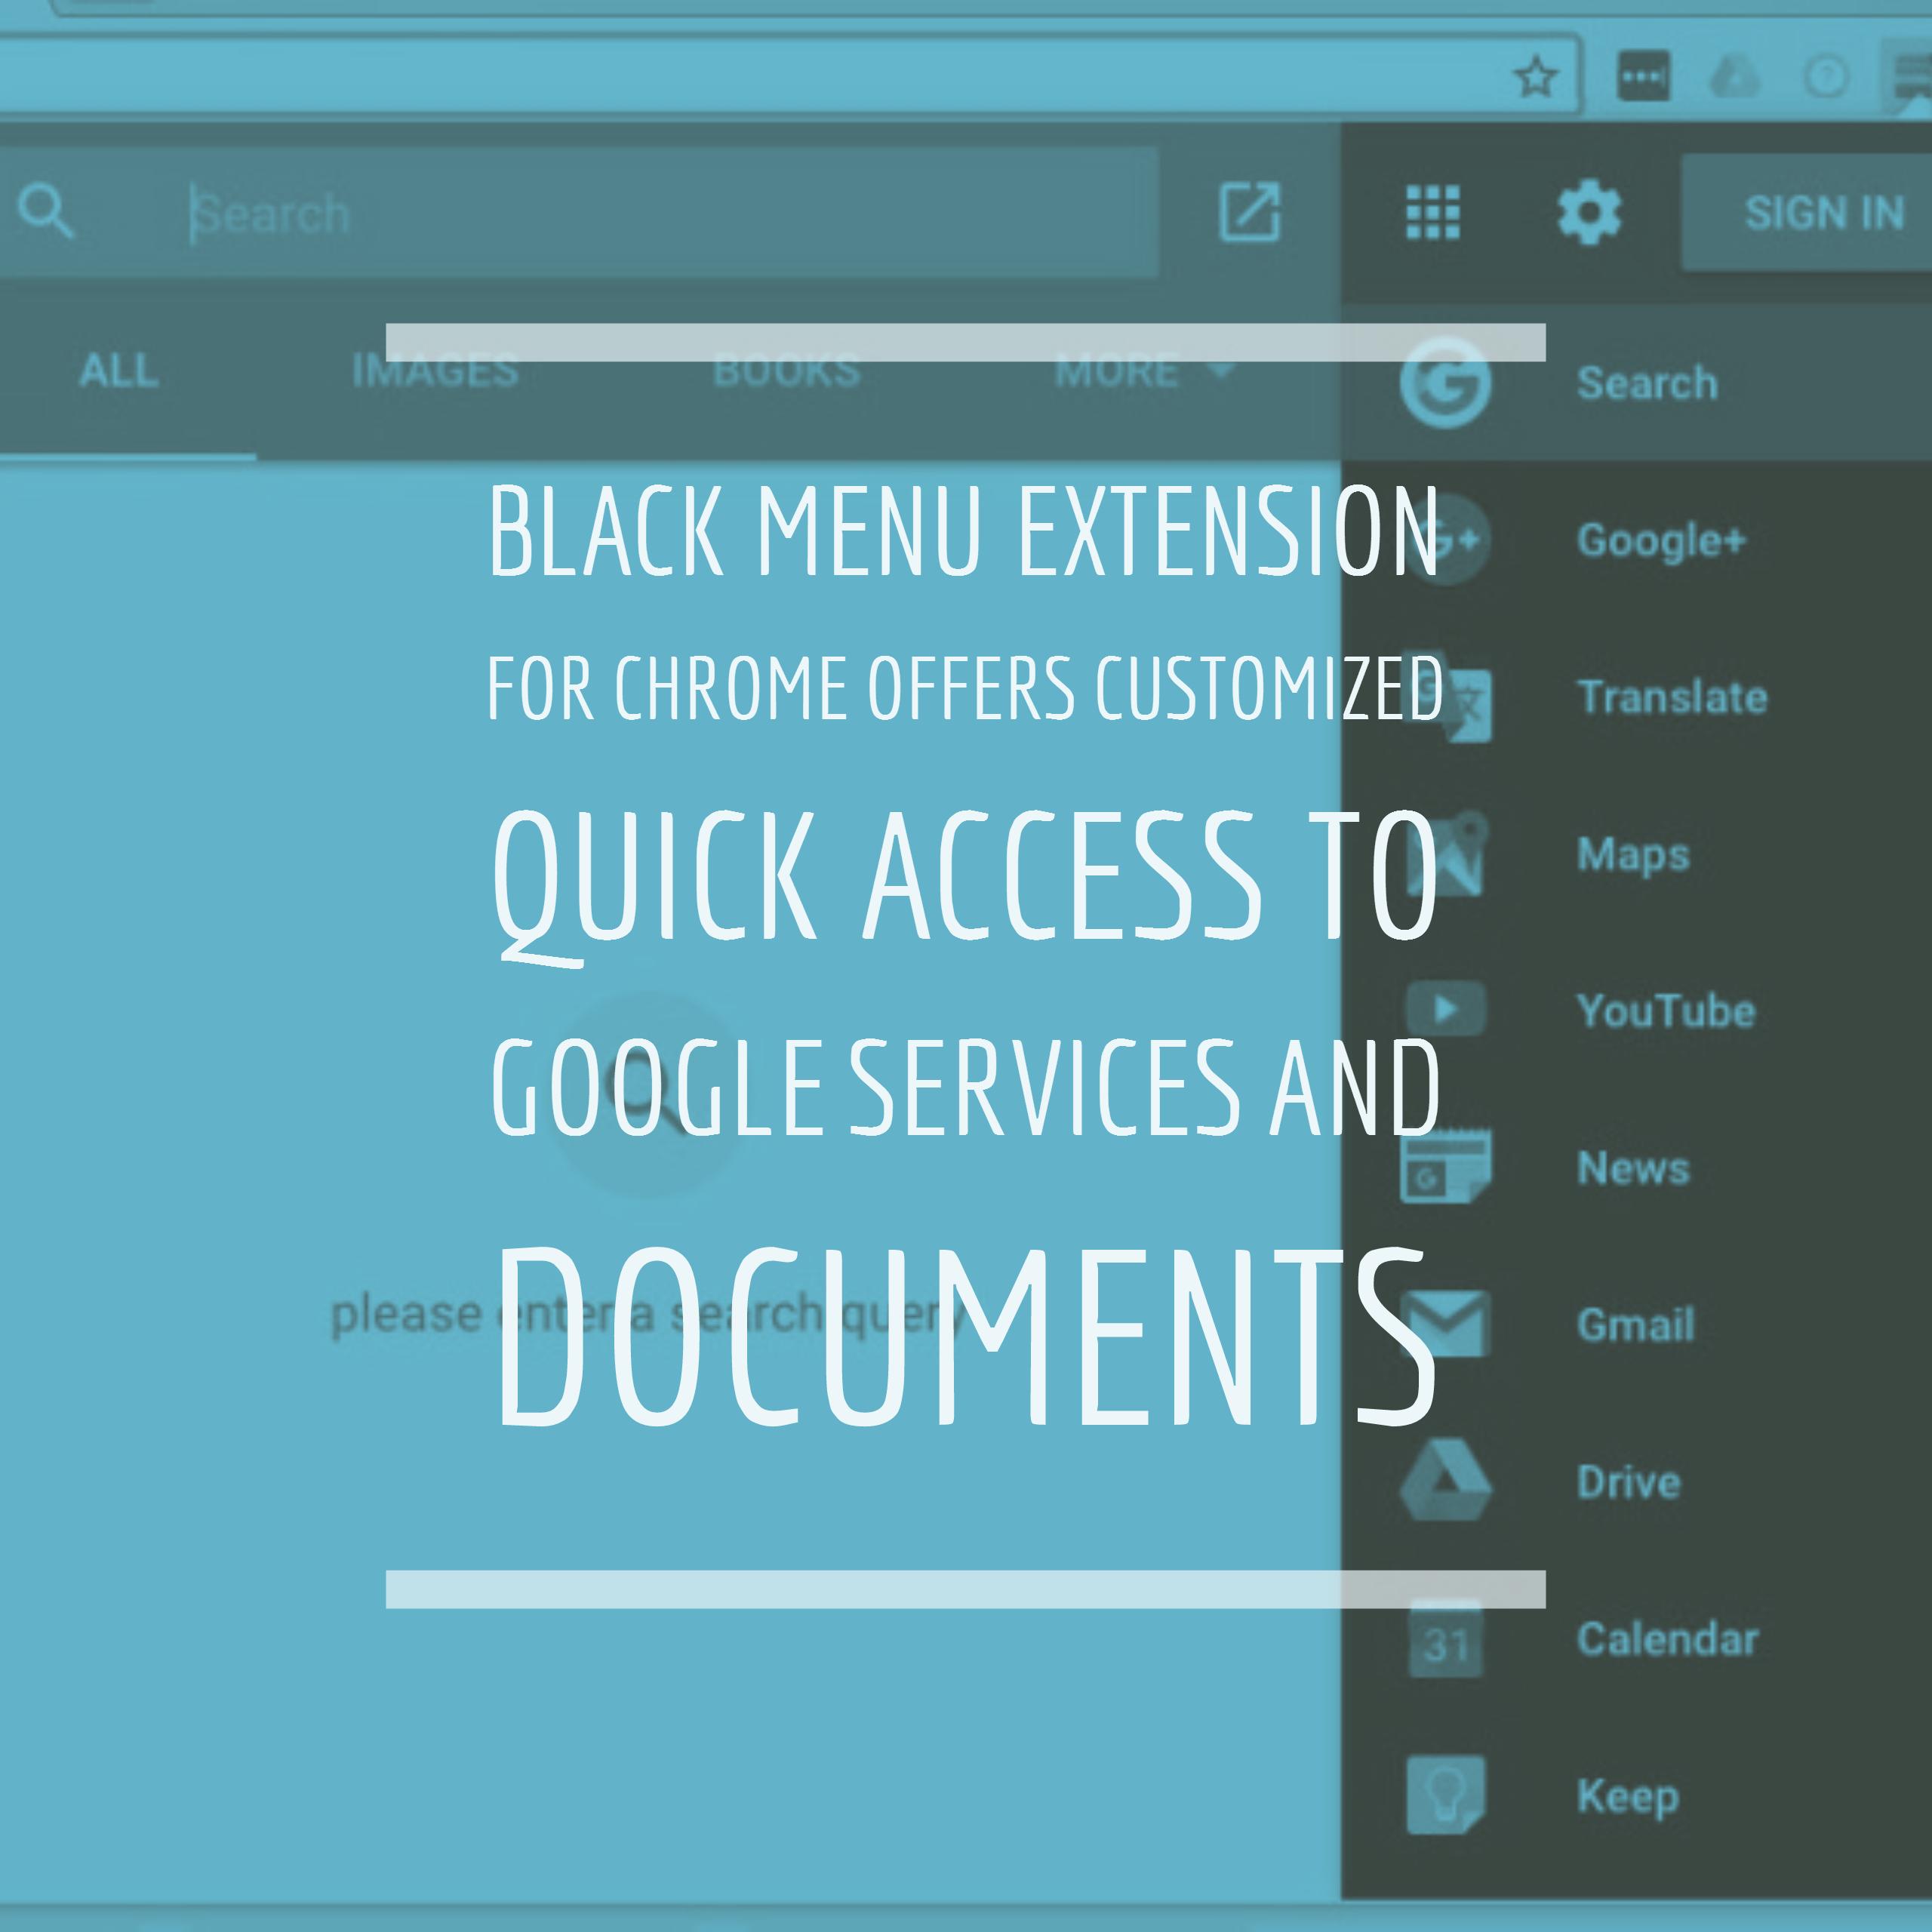 Black Menu extension for Chrome offers customized quick access to Google services and documents